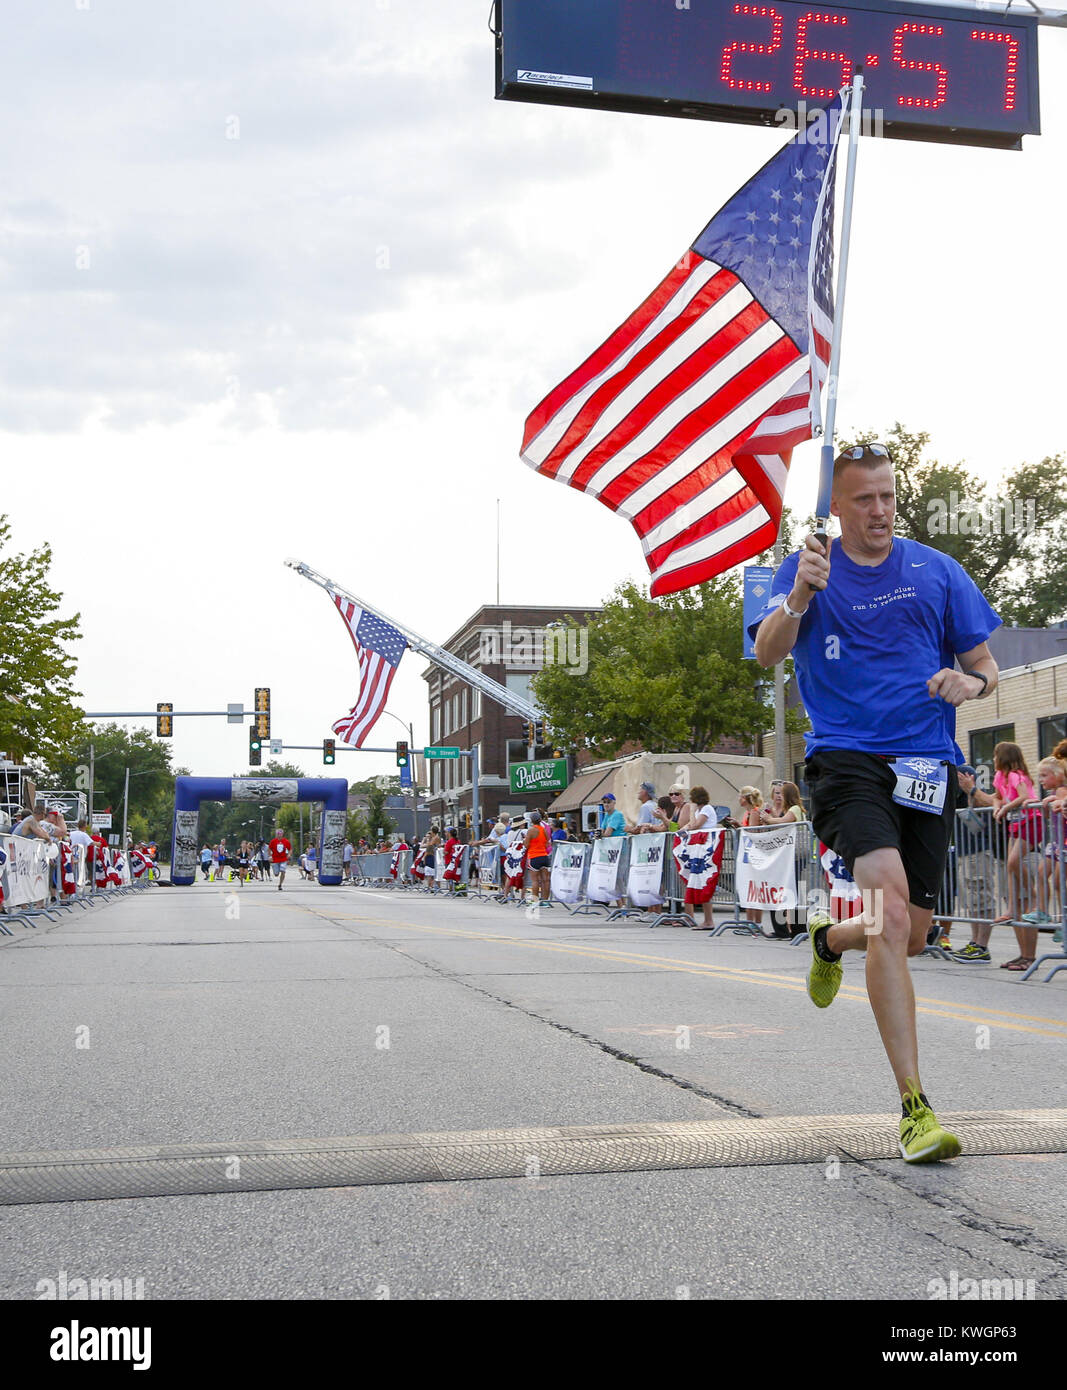 Davenport, Iowa, USA. 4th Aug, 2016. Shawn Muder of Davenport crosses the line of the 5k Freedom Run with an American flag in hand in East Moline on Thursday, August 4, 2016. The Freedom Run 5k, which featured a kid's obstacle and one mile race as well as the 5k itself, was held in downtown East Moline as a benefit to local military families. Credit: Andy Abeyta/Quad-City Times/ZUMA Wire/Alamy Live News Stock Photo